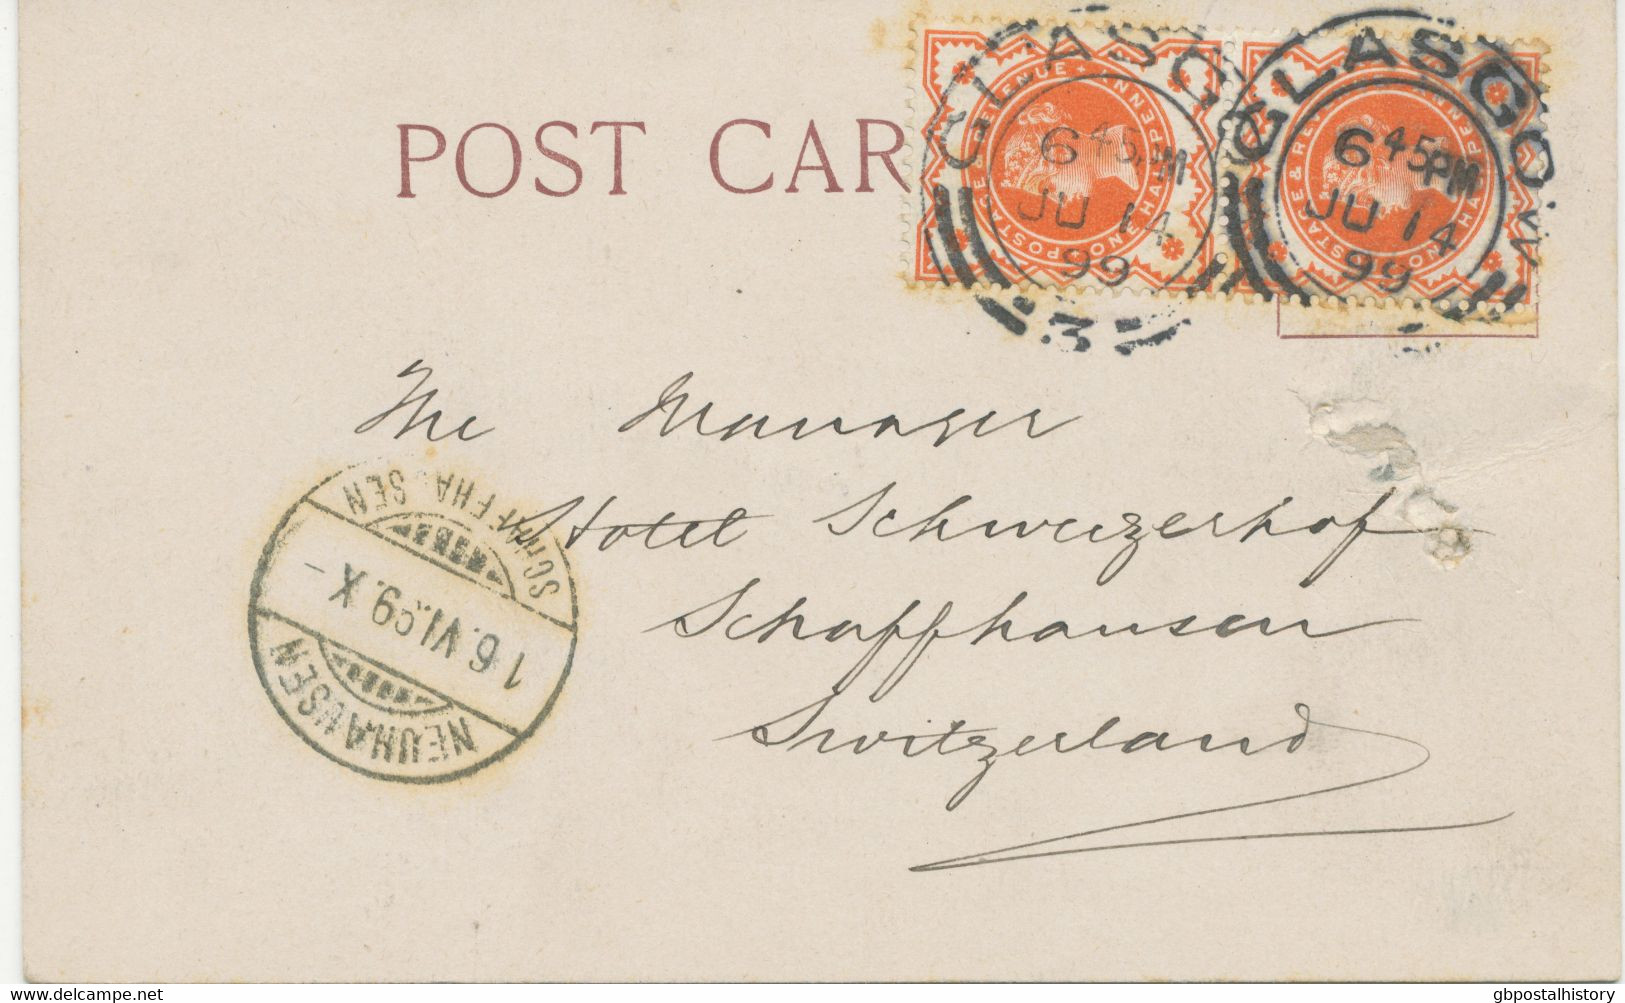 GB 1895/1902 26 Queen Victoria postal stationery envelopes/postcards/wrappers + franked covers most in very fine/superb